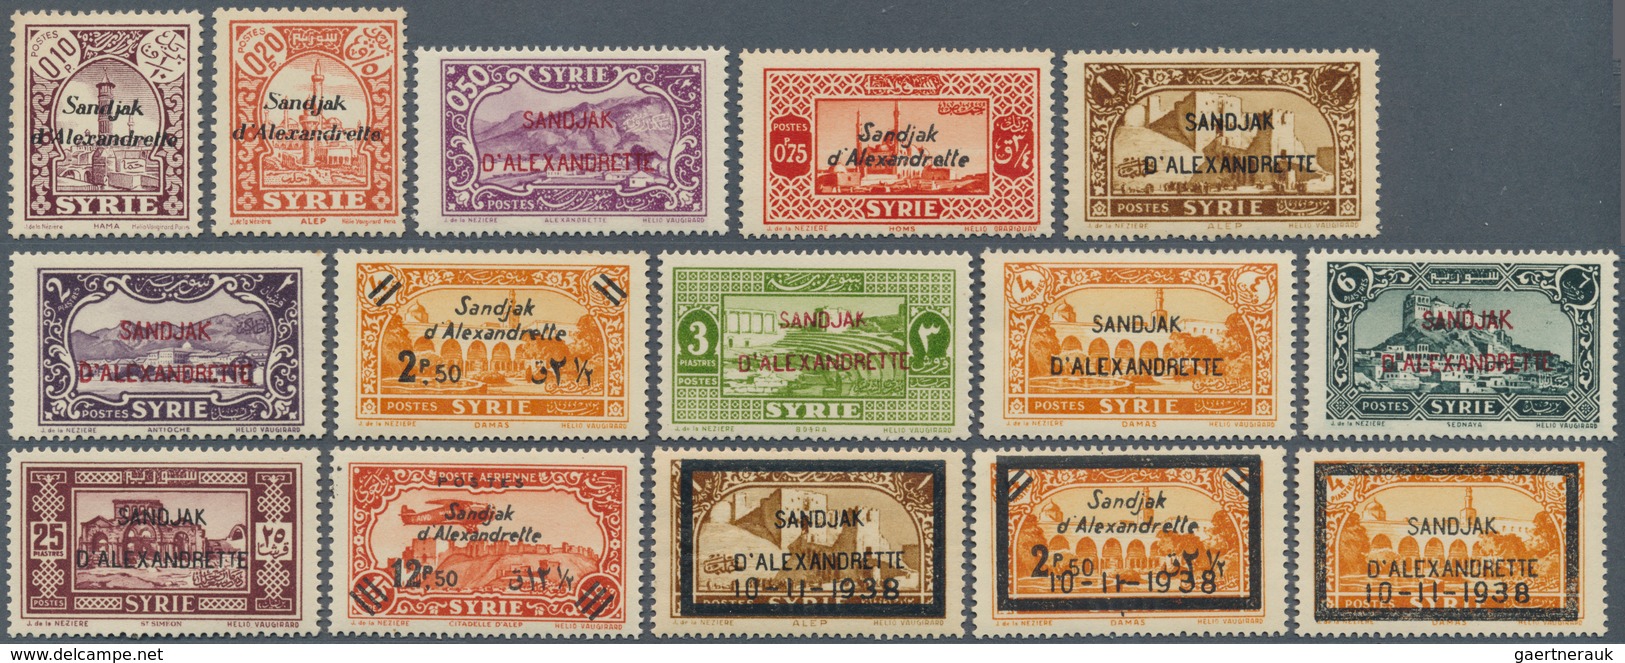 Syrien: 1919/1960, miscellaneous balance incl. mainly mint assortment of both Olympic Games sets (ei